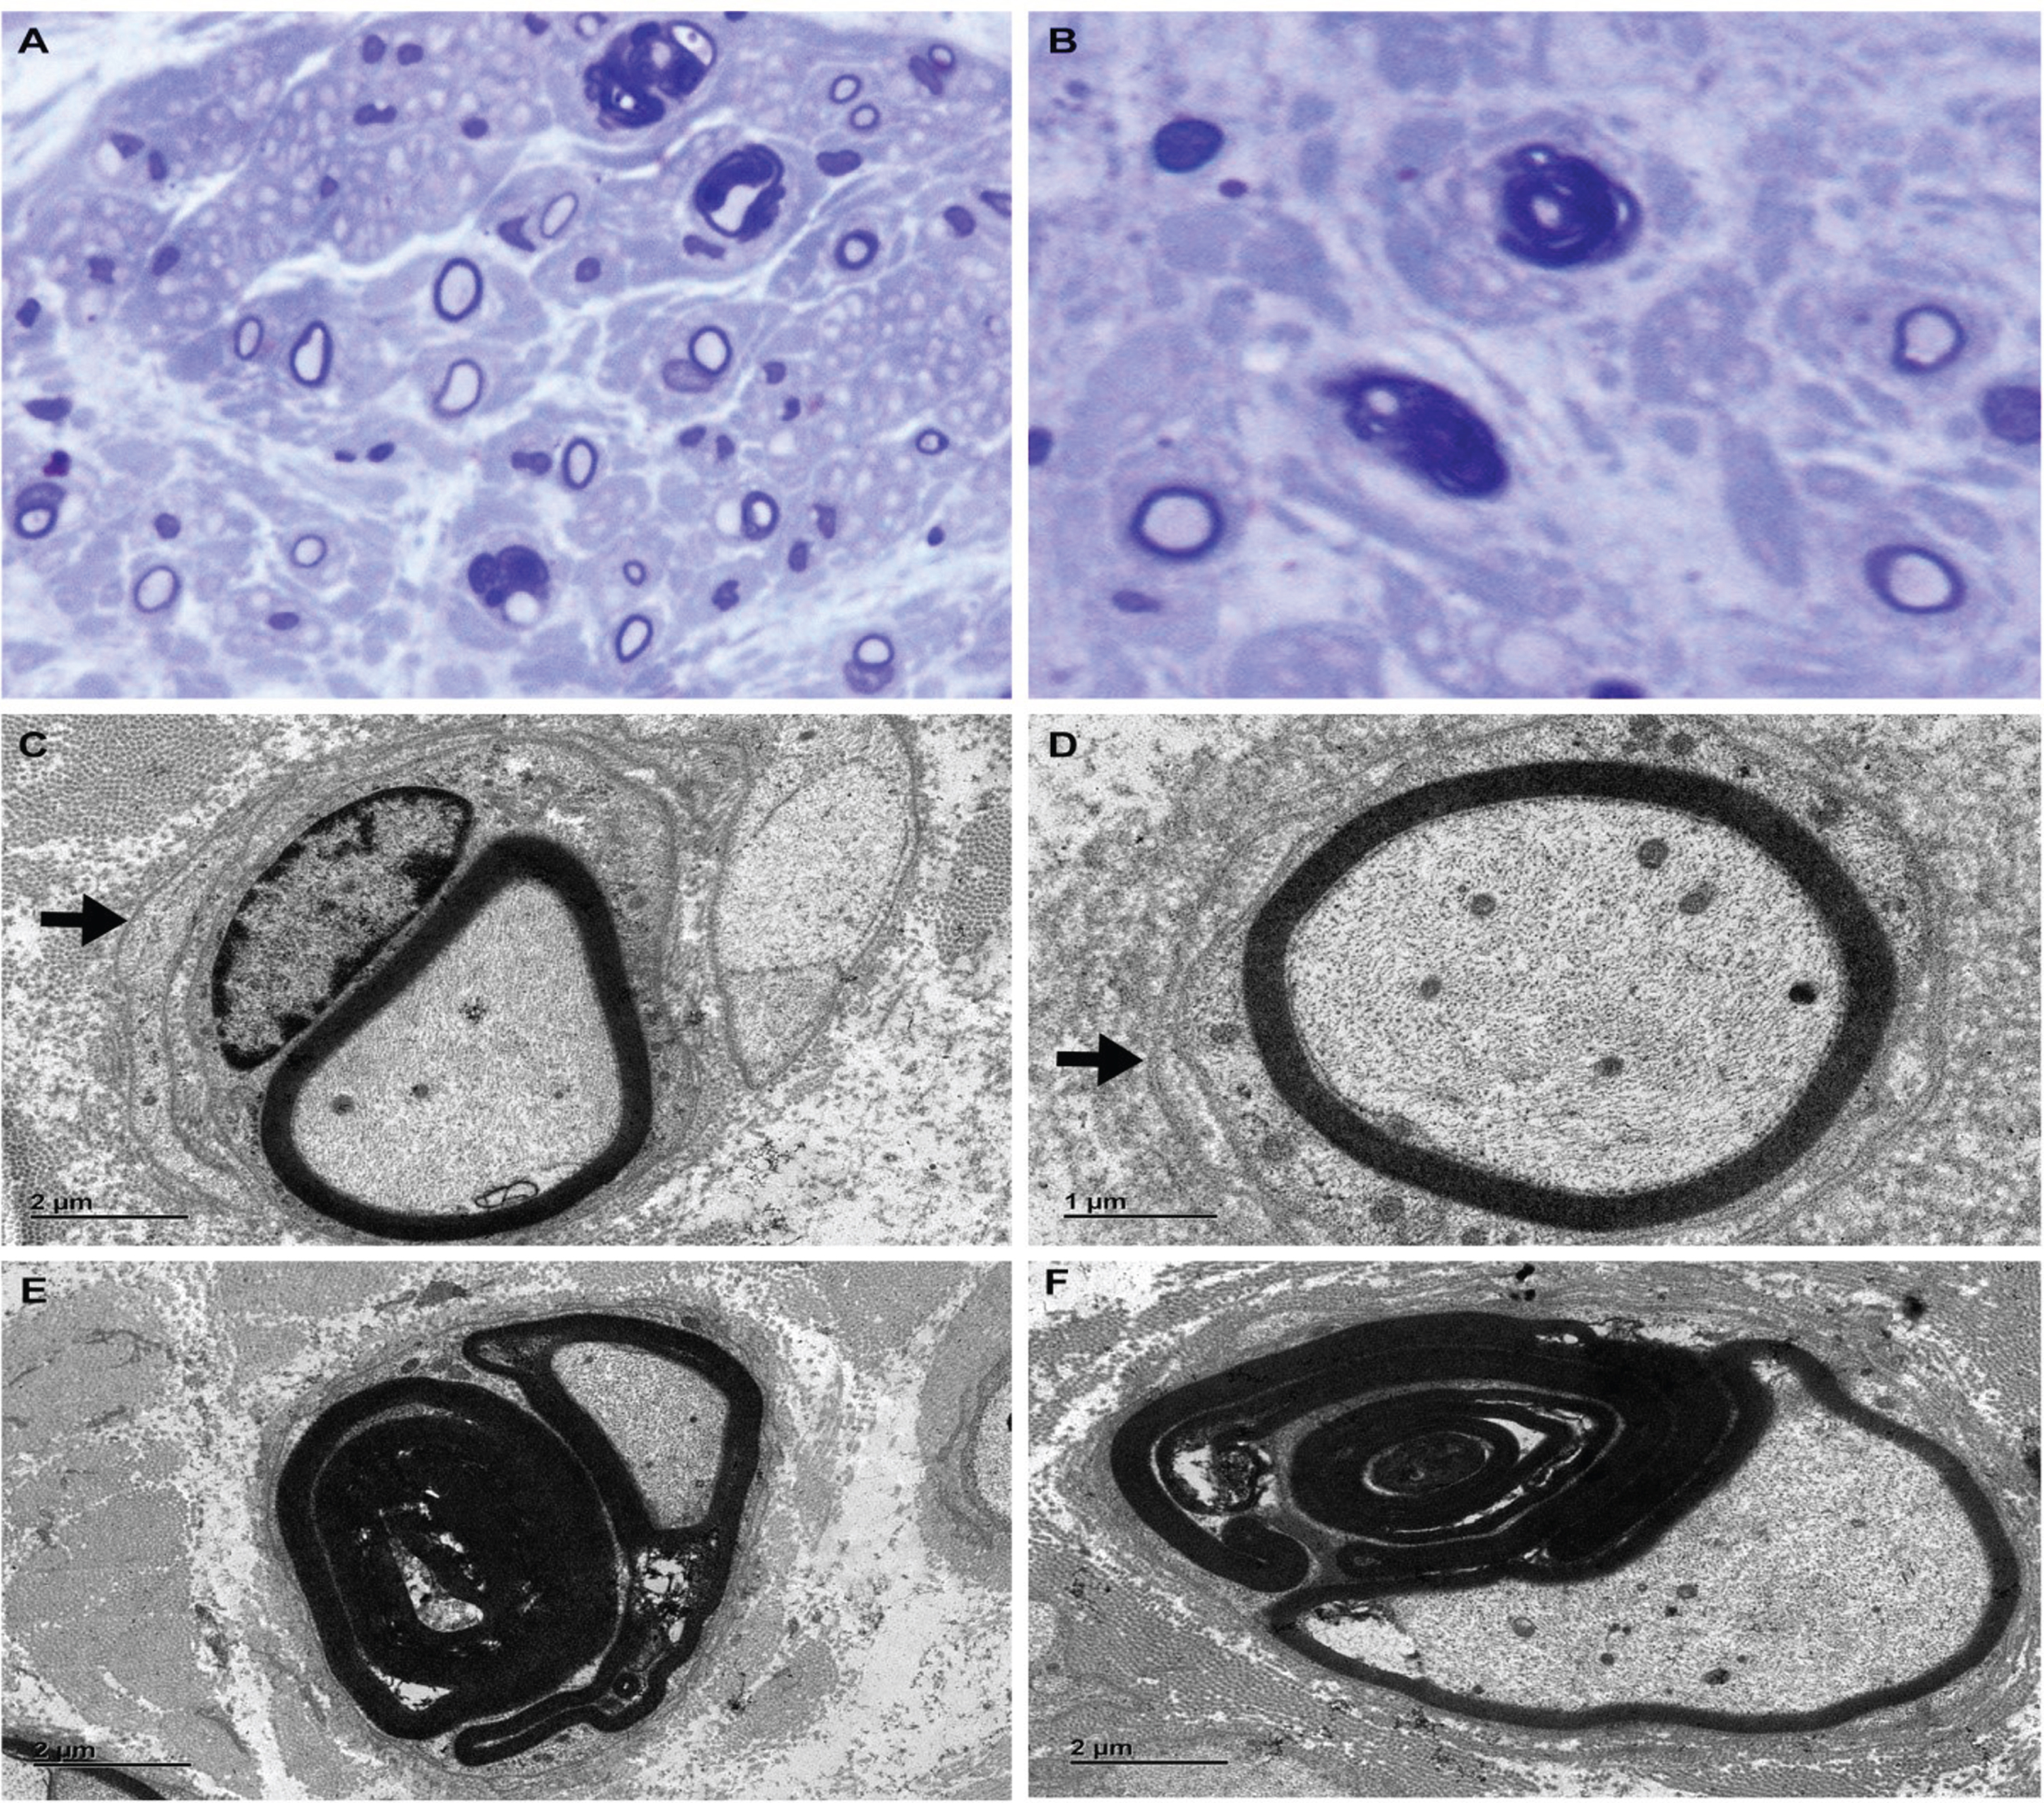 Nerve biopsy: (A) and (B) Semithin sections of resin embedded tissue stained with toluidine blue show severe and fairly uniform depletion of myelinated fibers, thin myelin sheaths, occasional onion bulbs, and fibers with abnormal myelin folds (A ×200, B ×400). (C) and (D) Electron micrography- Ultrathin sections stained with uranyl acetate and lead citrate reveal thinly myelinated fibers with Schwann cell lamellae (arrow) indicating early onion bulb formation [C ×2000; D, ×4000]. (E) and (F) Fibers with numerous thick abnormal myelin folds forming redundant outpouchings and infoldings [E & F, ×2000].